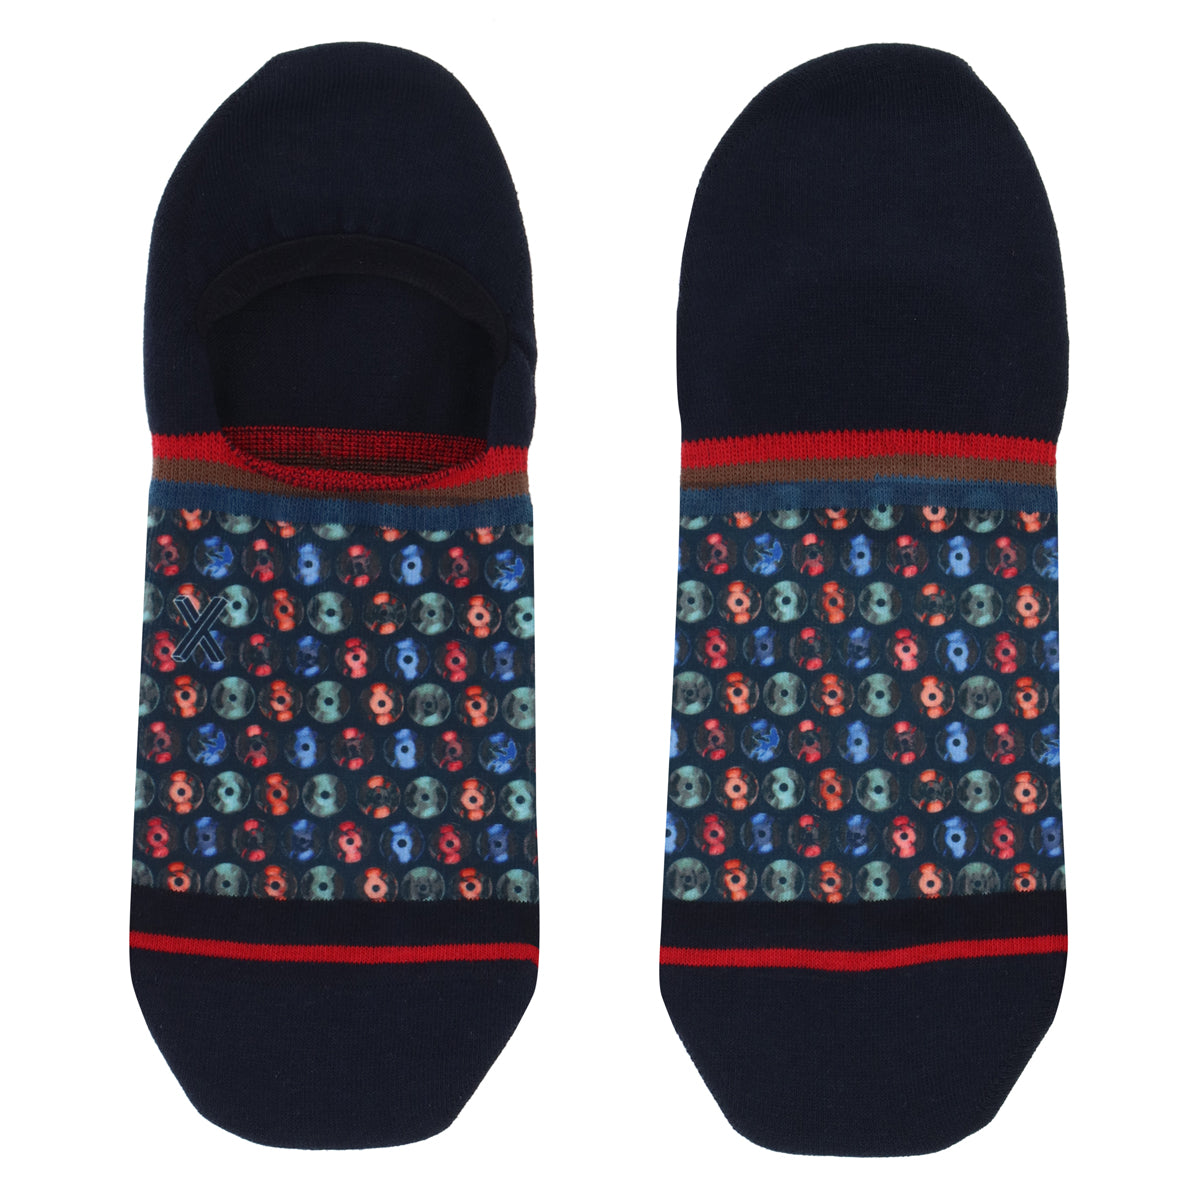 XPOOOS x AFNF Record Collection footies pour hommes